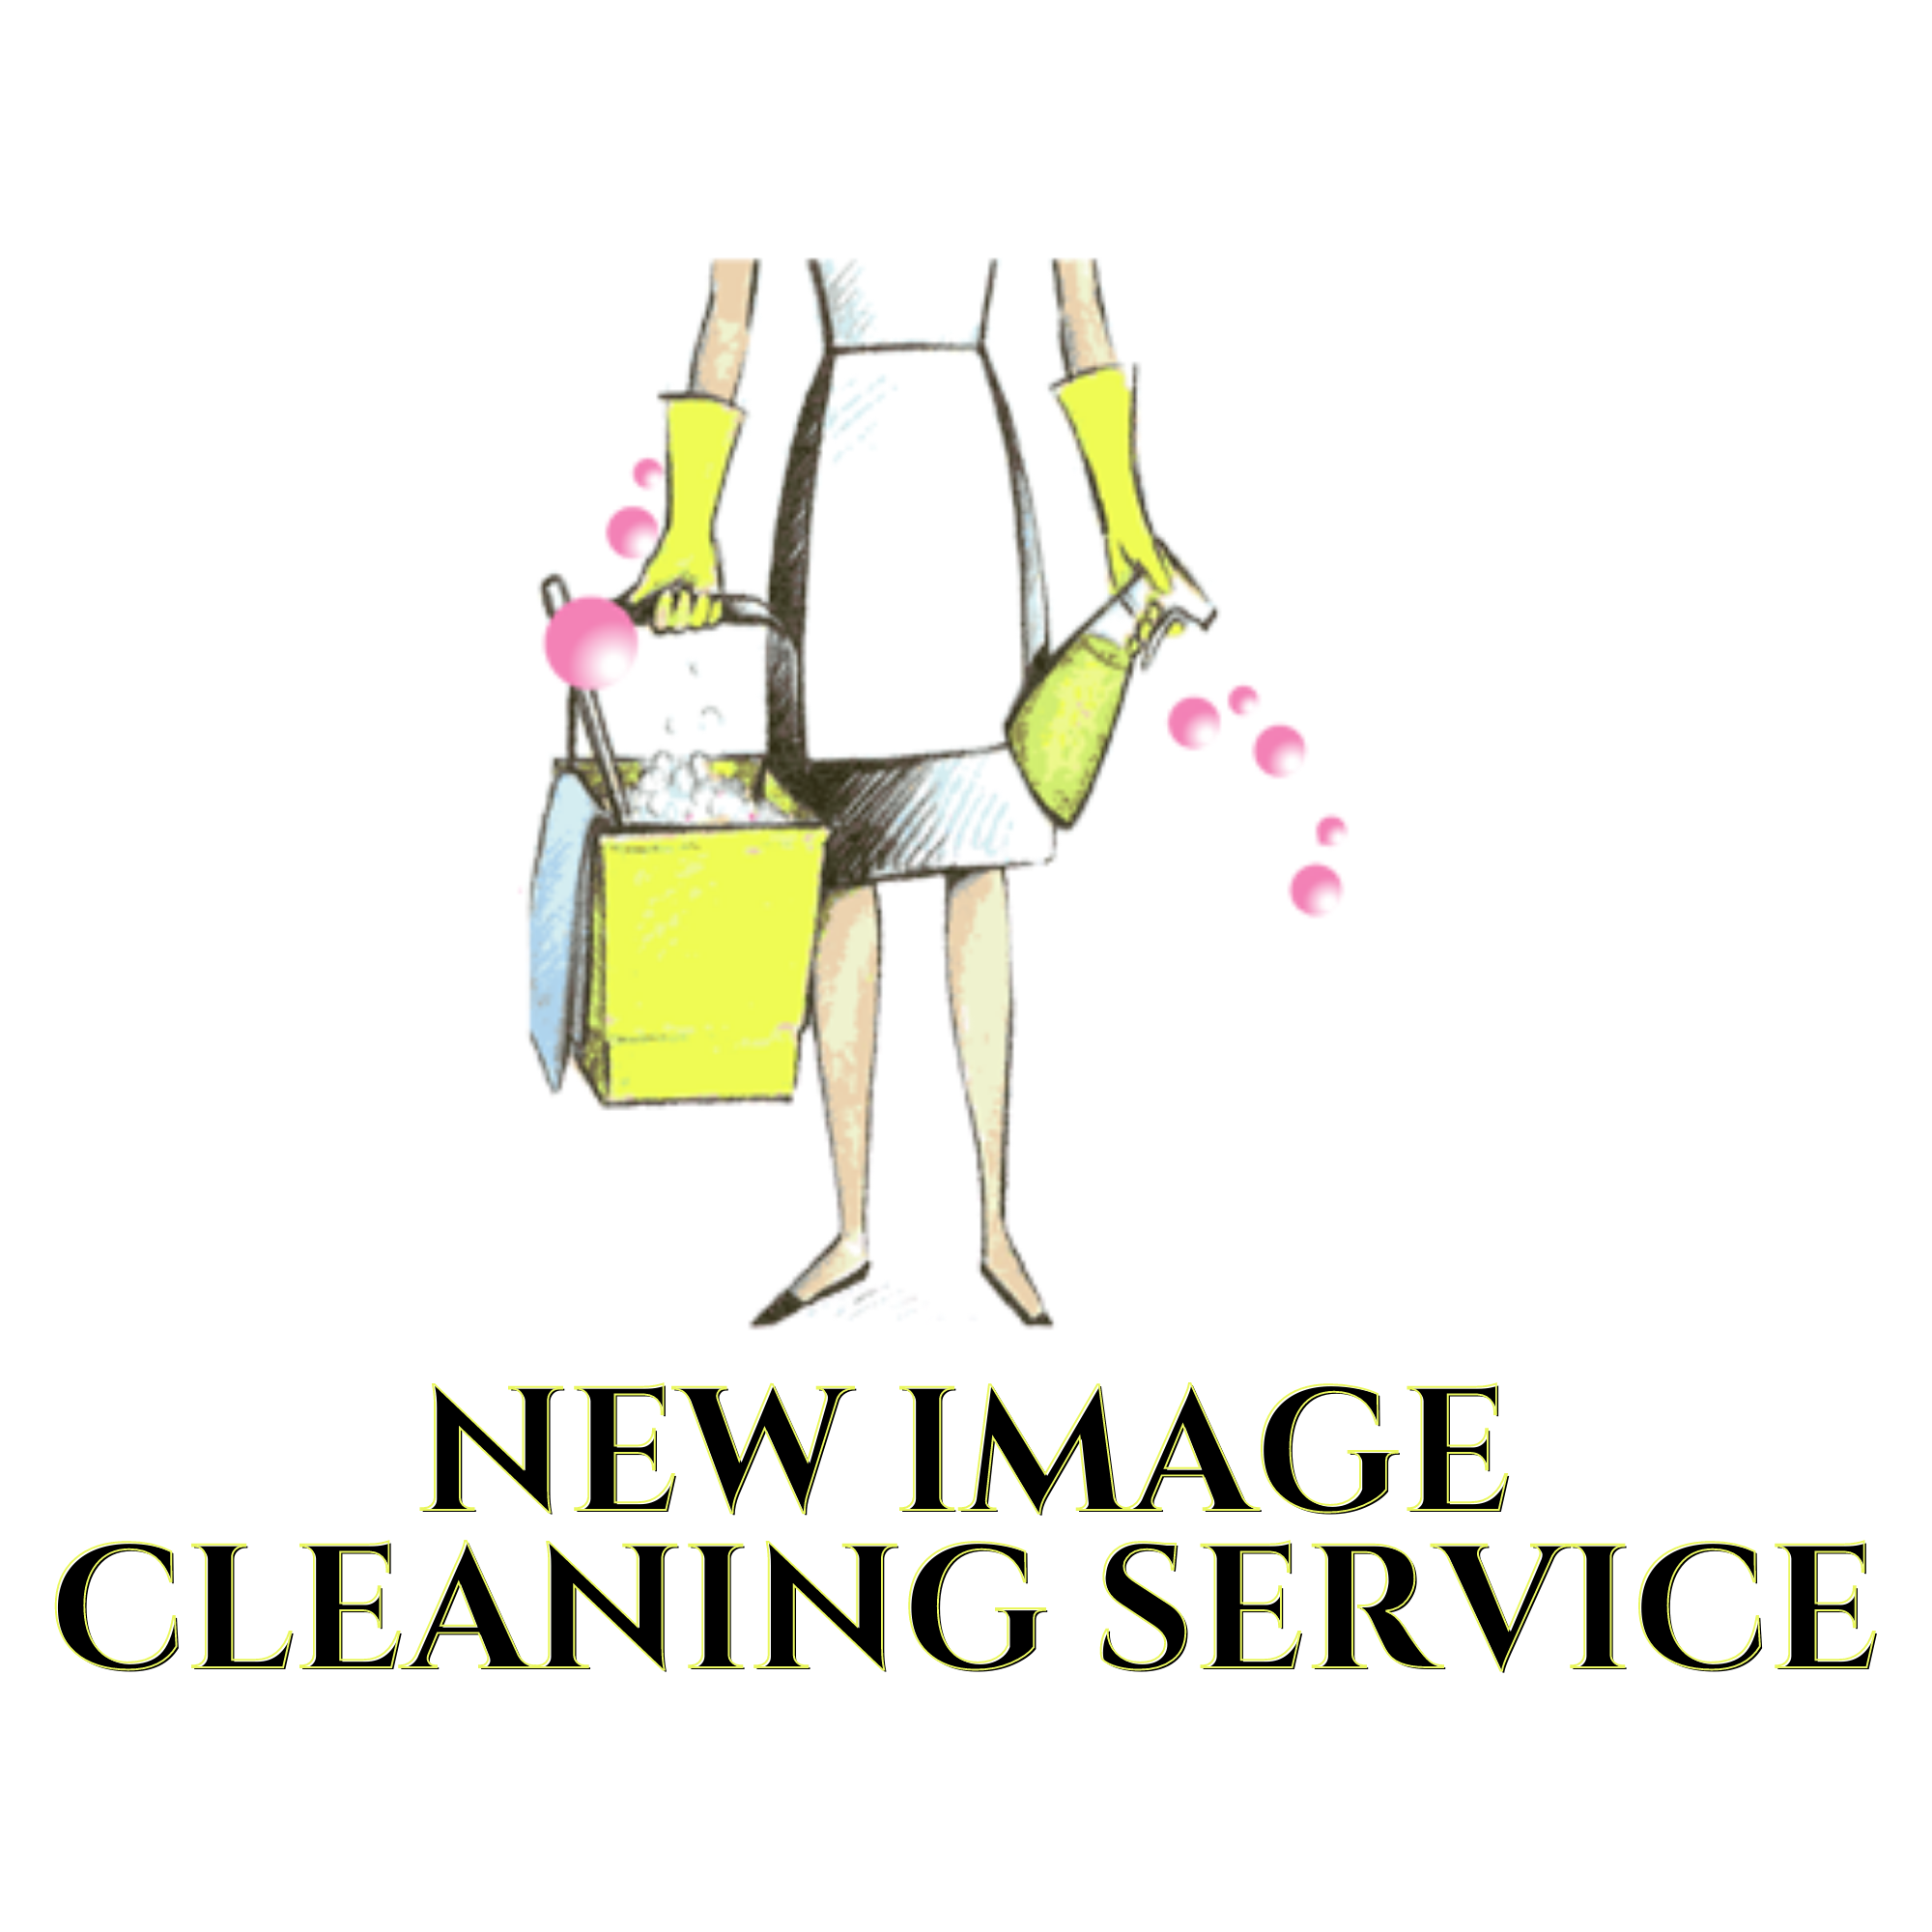 New Image Cleaning Service - Richmond, VA 23219 - (804)239-6790 | ShowMeLocal.com